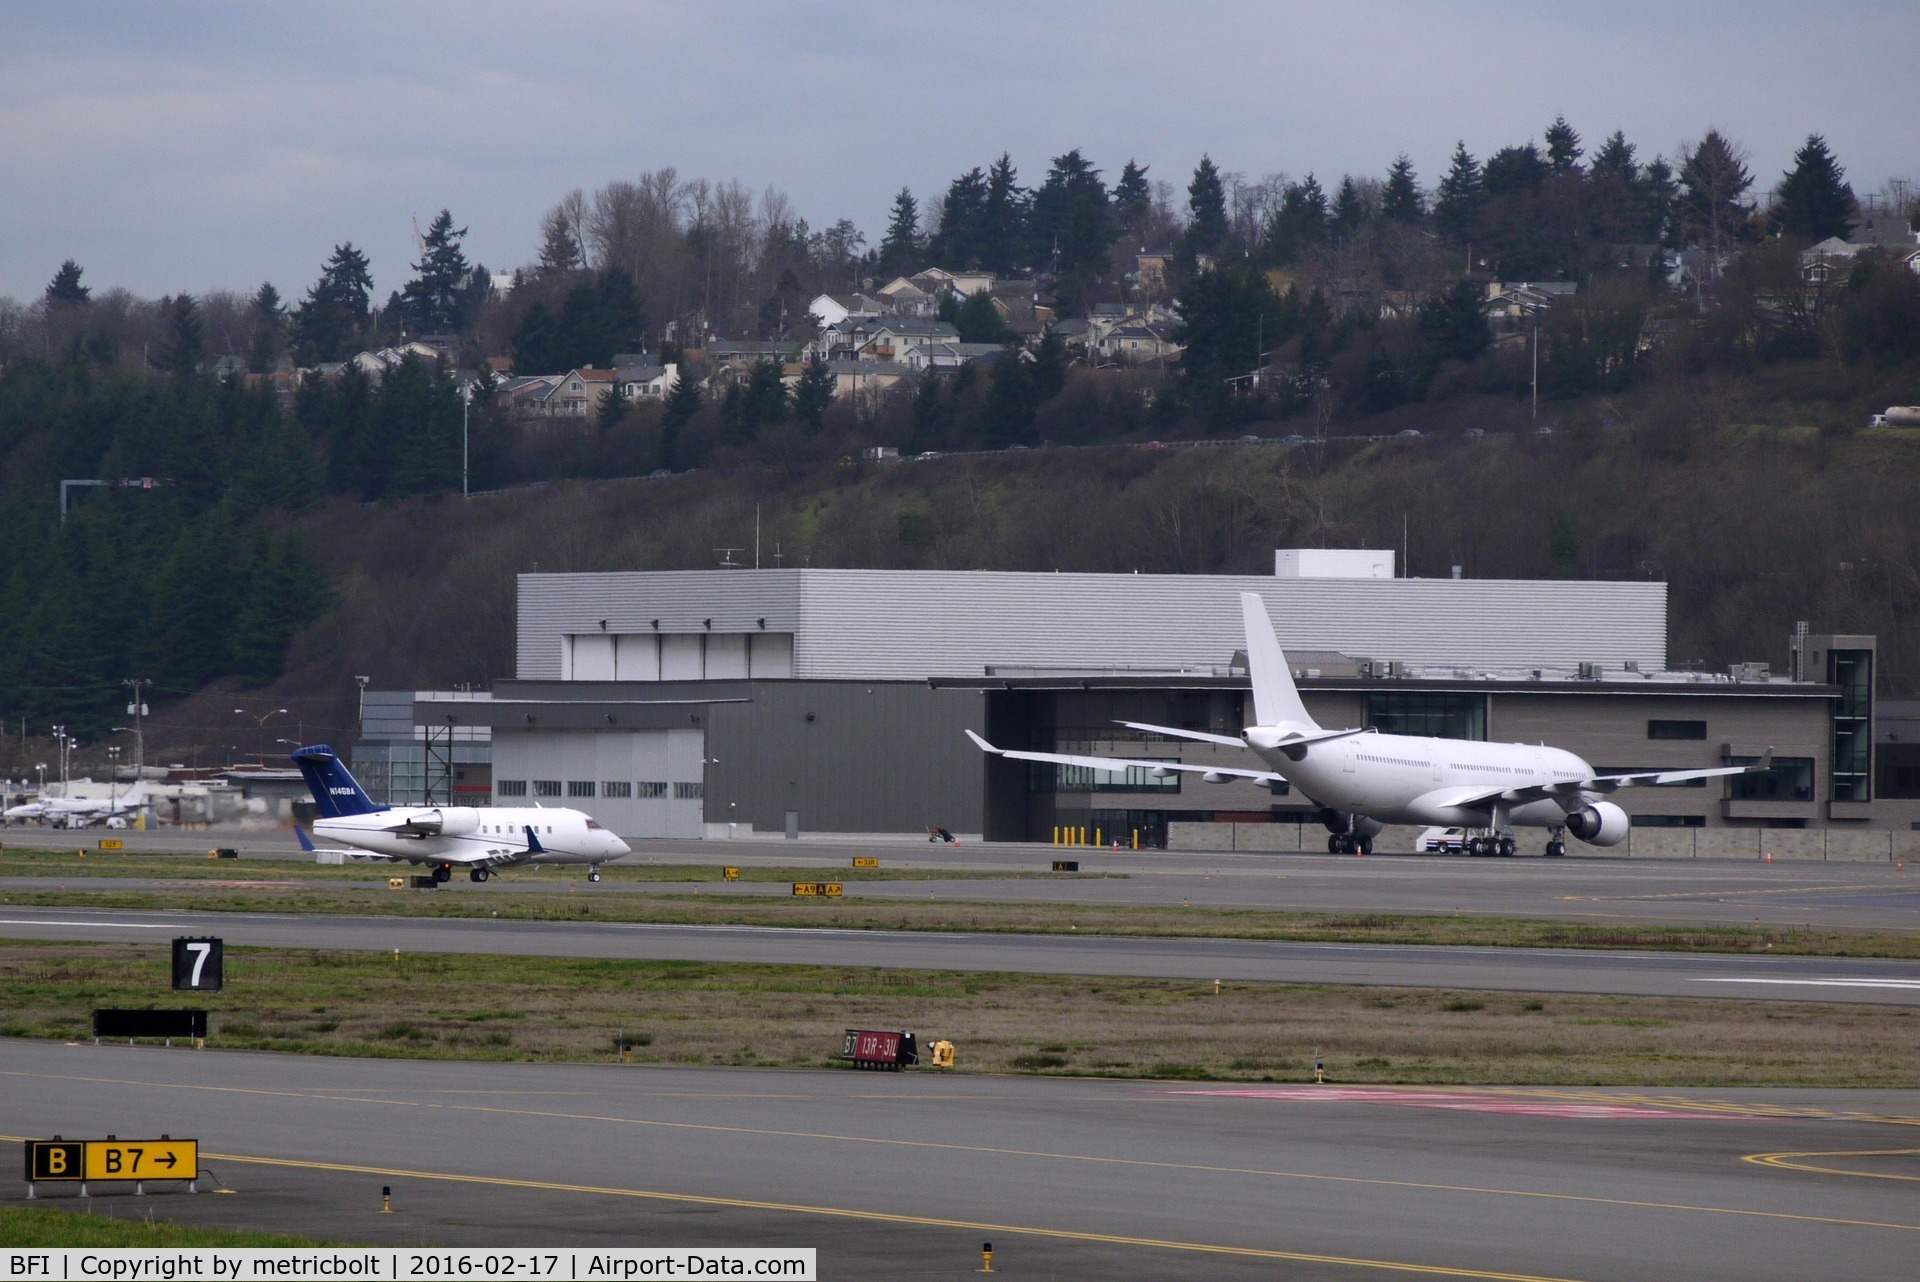 Boeing Field/king County International Airport (BFI) - At BFI